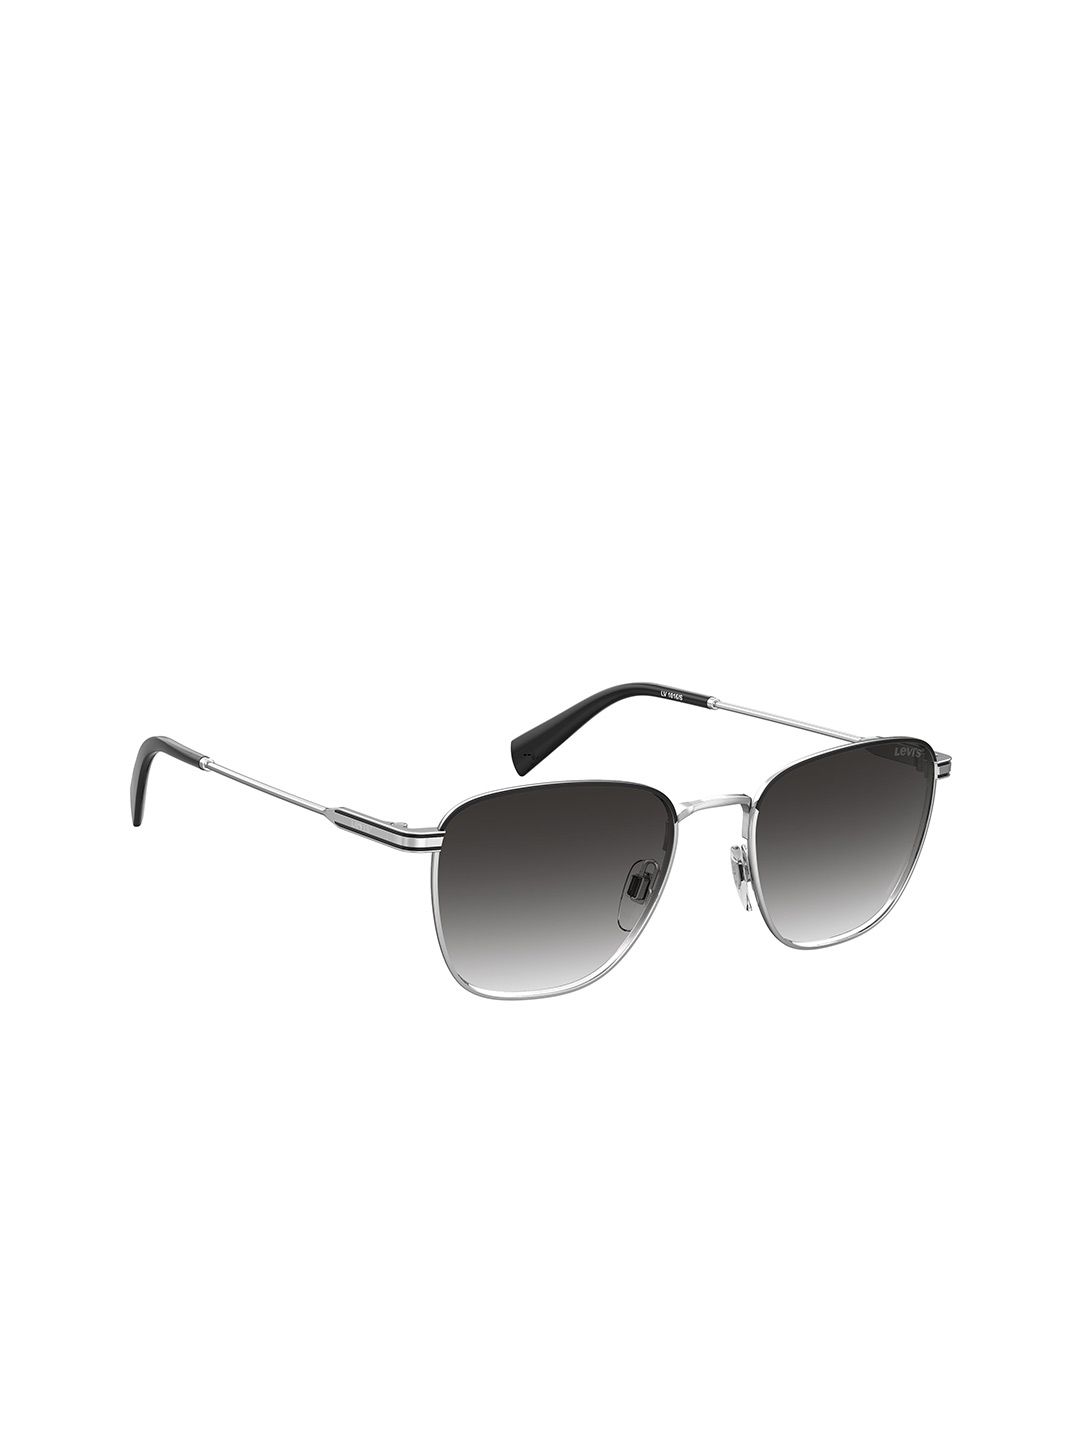 Levis Unisex Grey Lens & Silver-Toned UV Protected Square Sunglasses LV 1016/S 010 529O Price in India